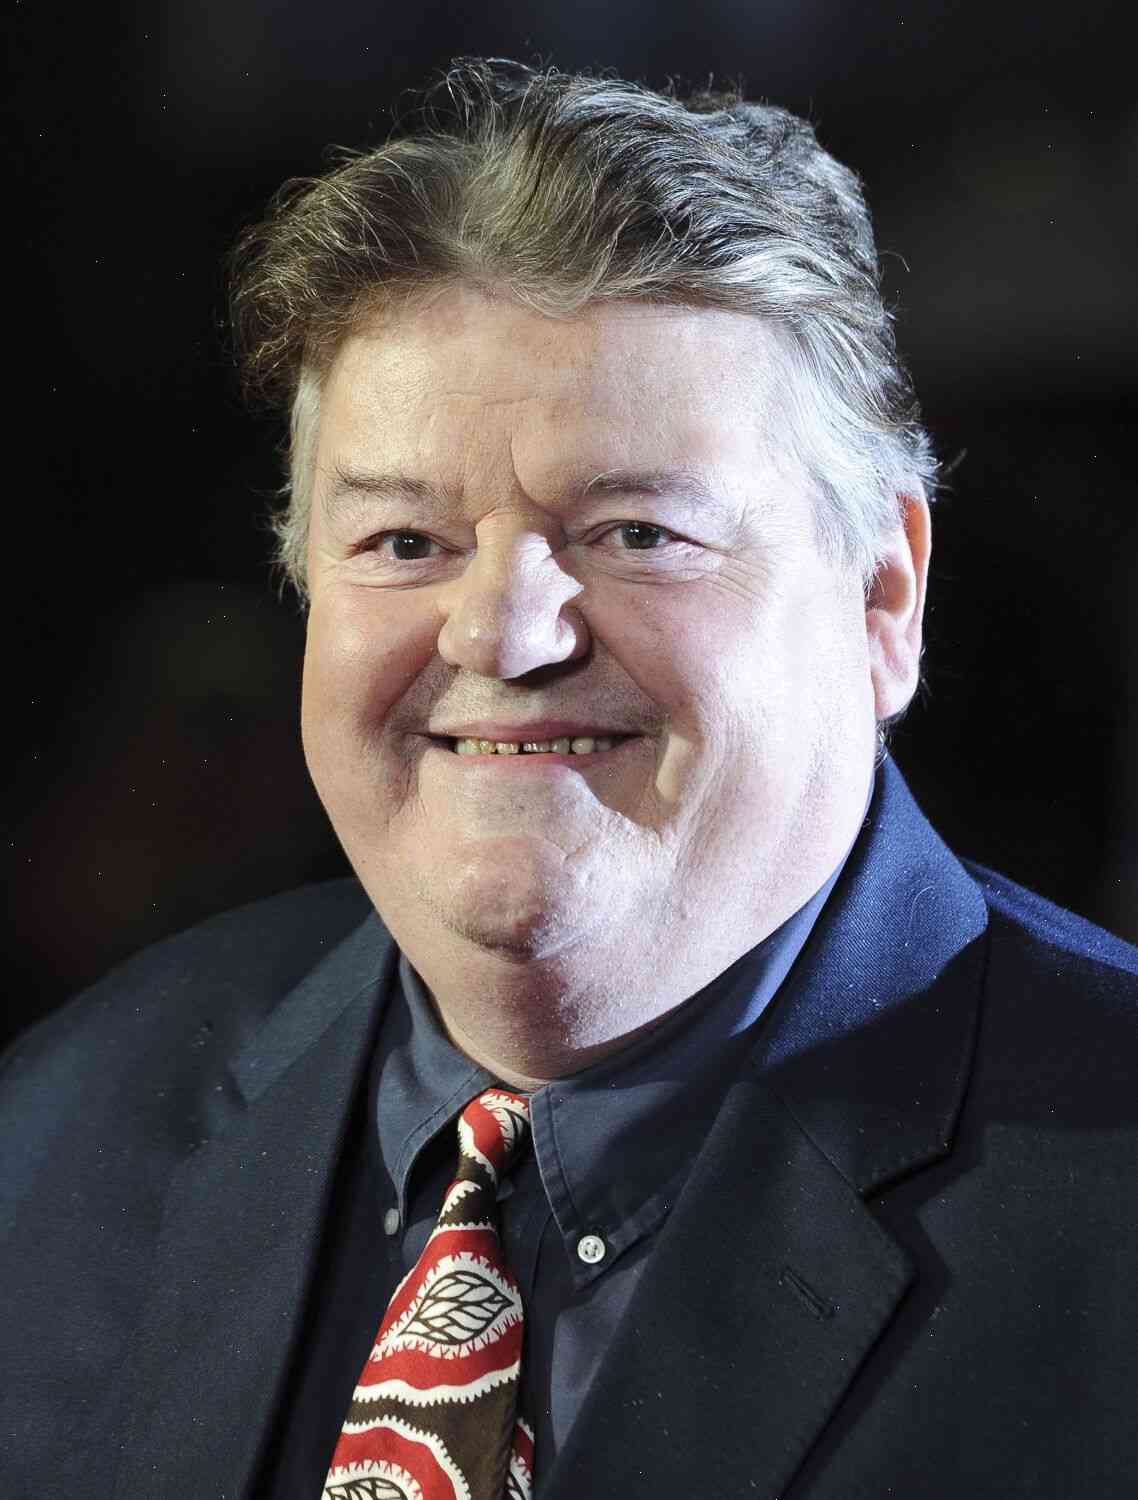 Robbie Coltrane, the 'Harry Potter' actor, has died at the age of 72